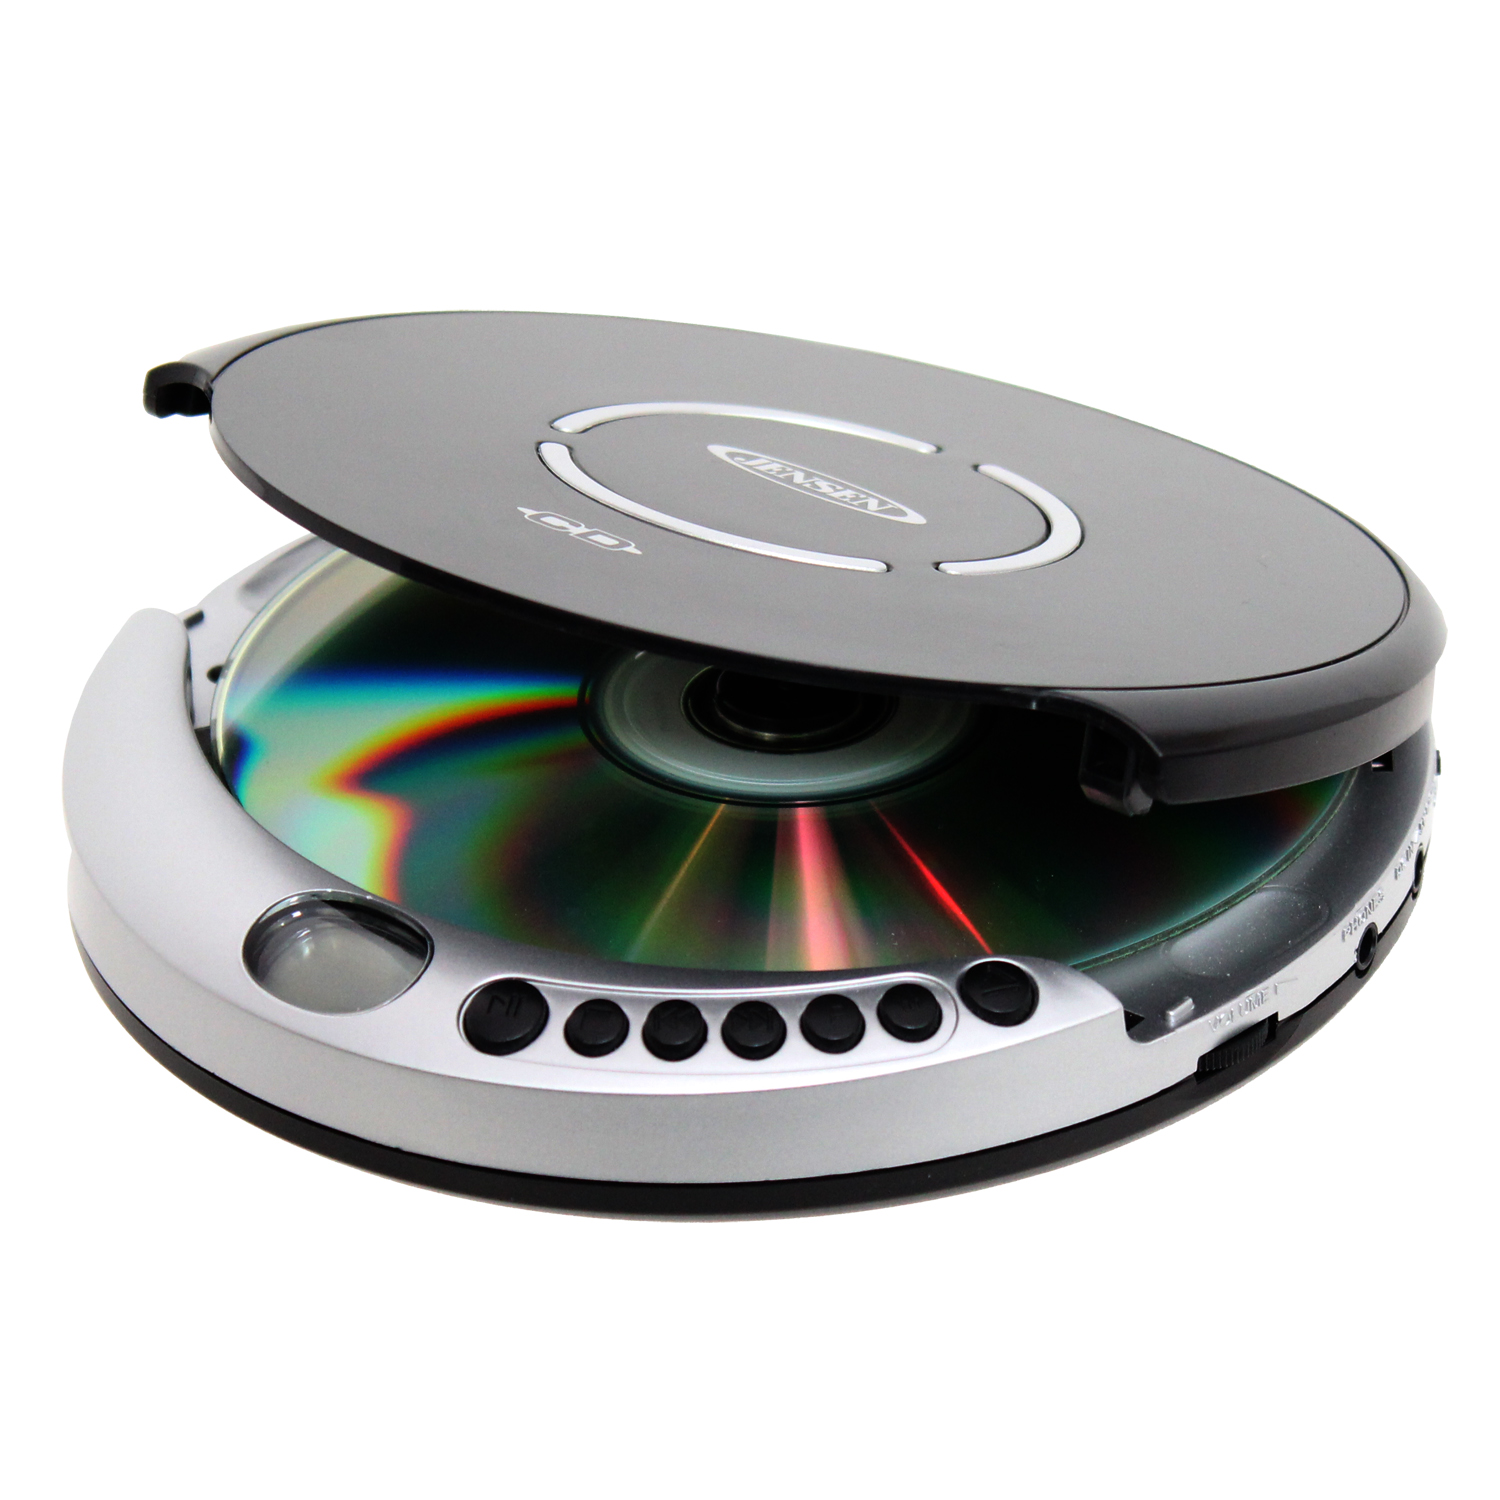 Jensen CD-60R Portable CD Player with Bass Boost - image 2 of 3